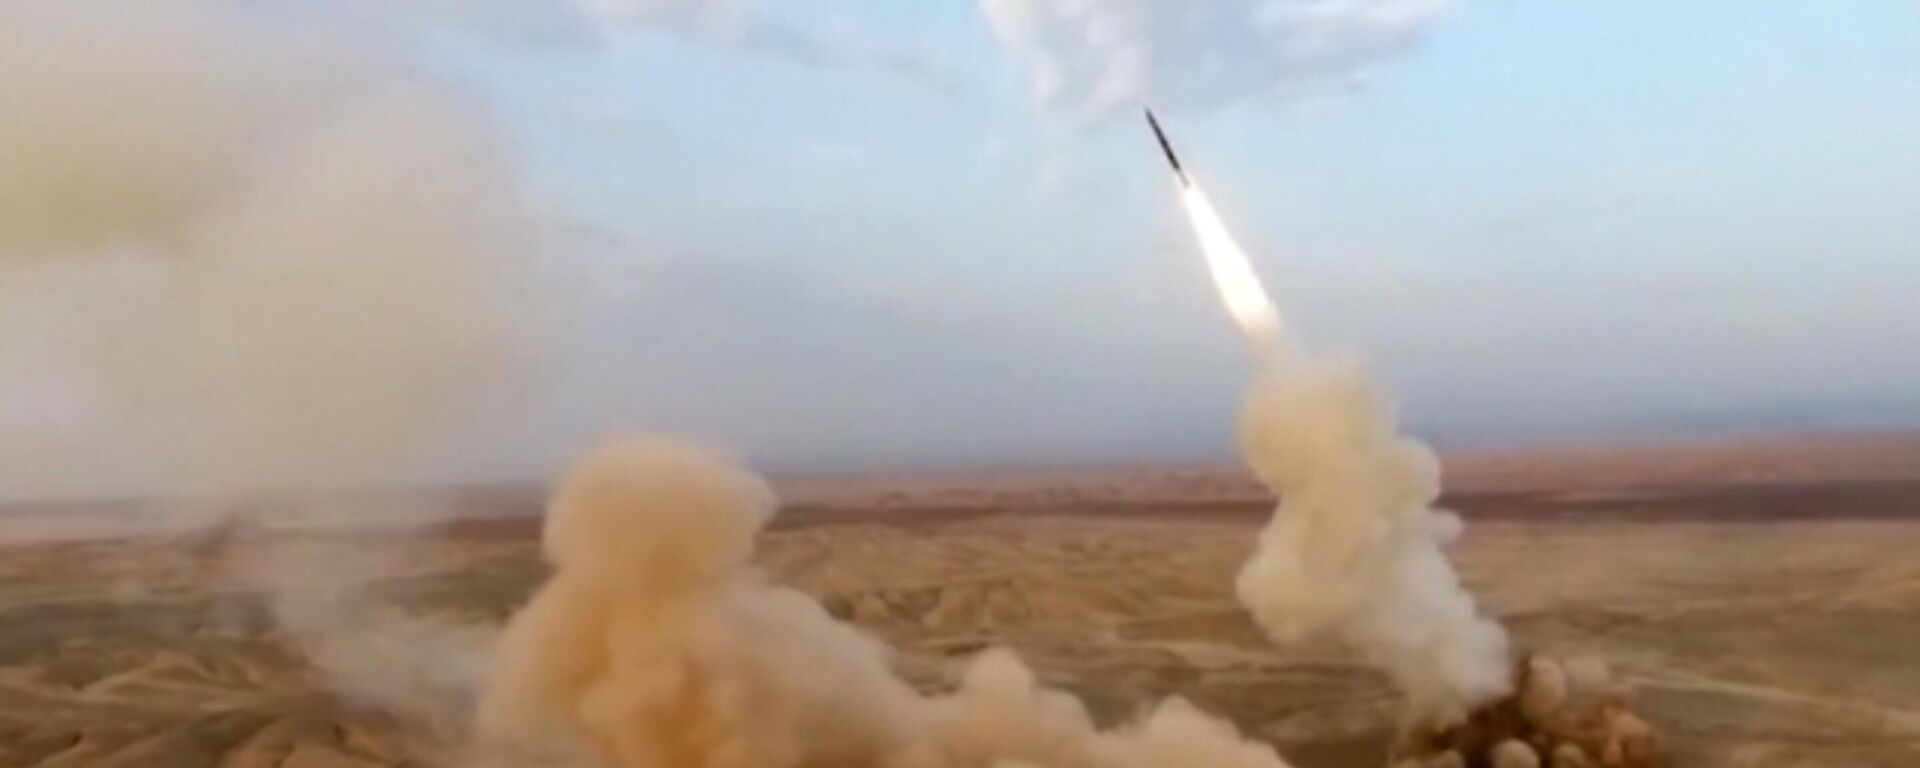 This frame grab from video shows the launching of underground ballistic missiles by the Iranian Revolutionary Guard during a military exercise, July 29, 2020. Iran's paramilitary guard launched underground ballistic missiles as part of an exercise involving a mock-up aircraft carrier in the Strait of Hormuz, state television reported Wednesday - Sputnik International, 1920, 13.04.2024